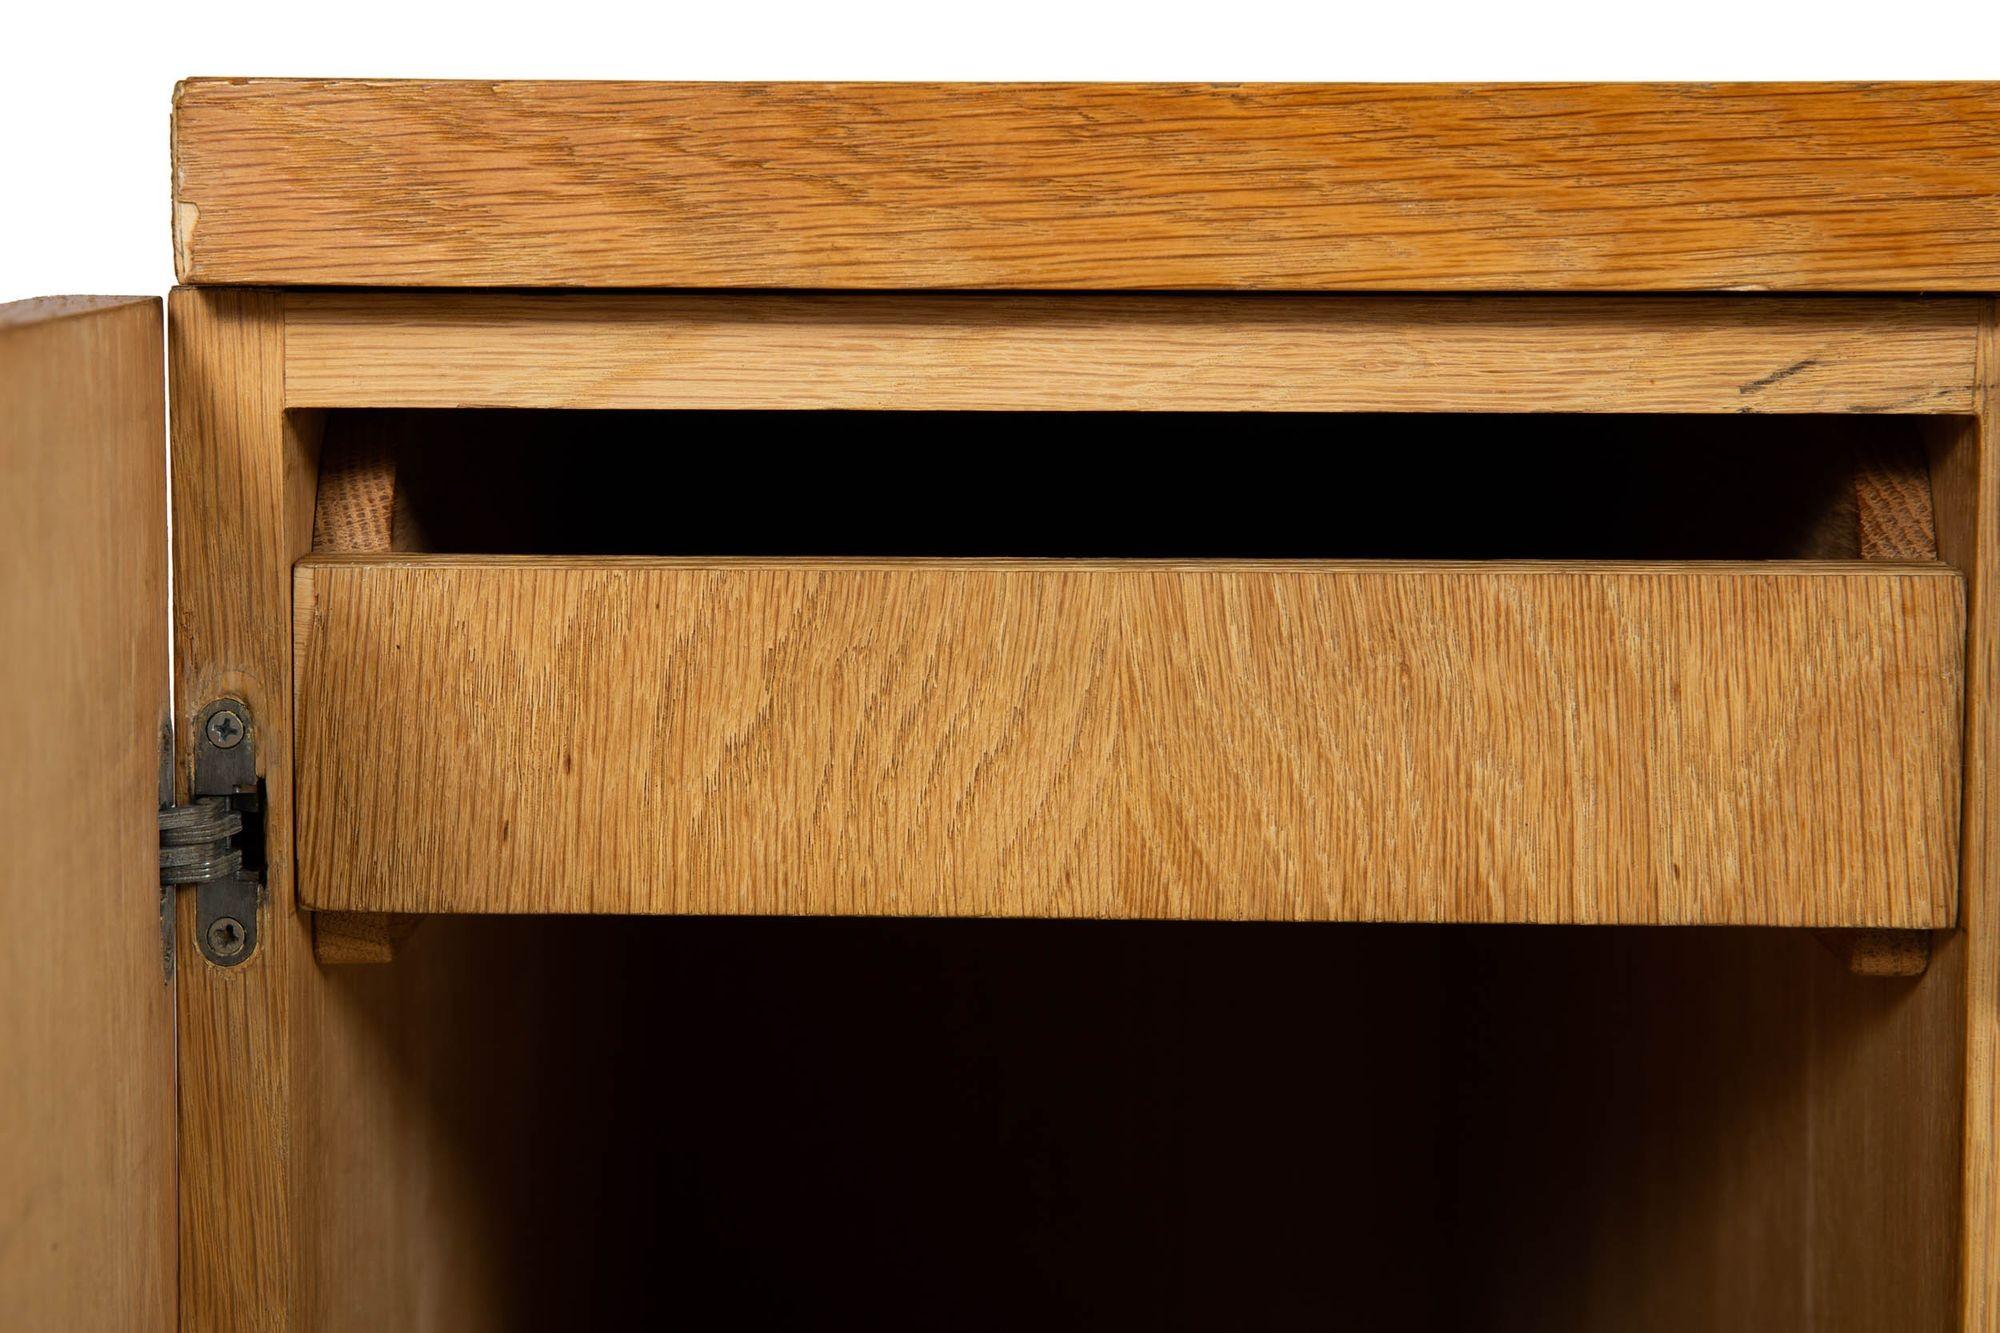 French Modernist Cerused Oak and Lacquered Skin Pedestal Desk ca. 1950s For Sale 8